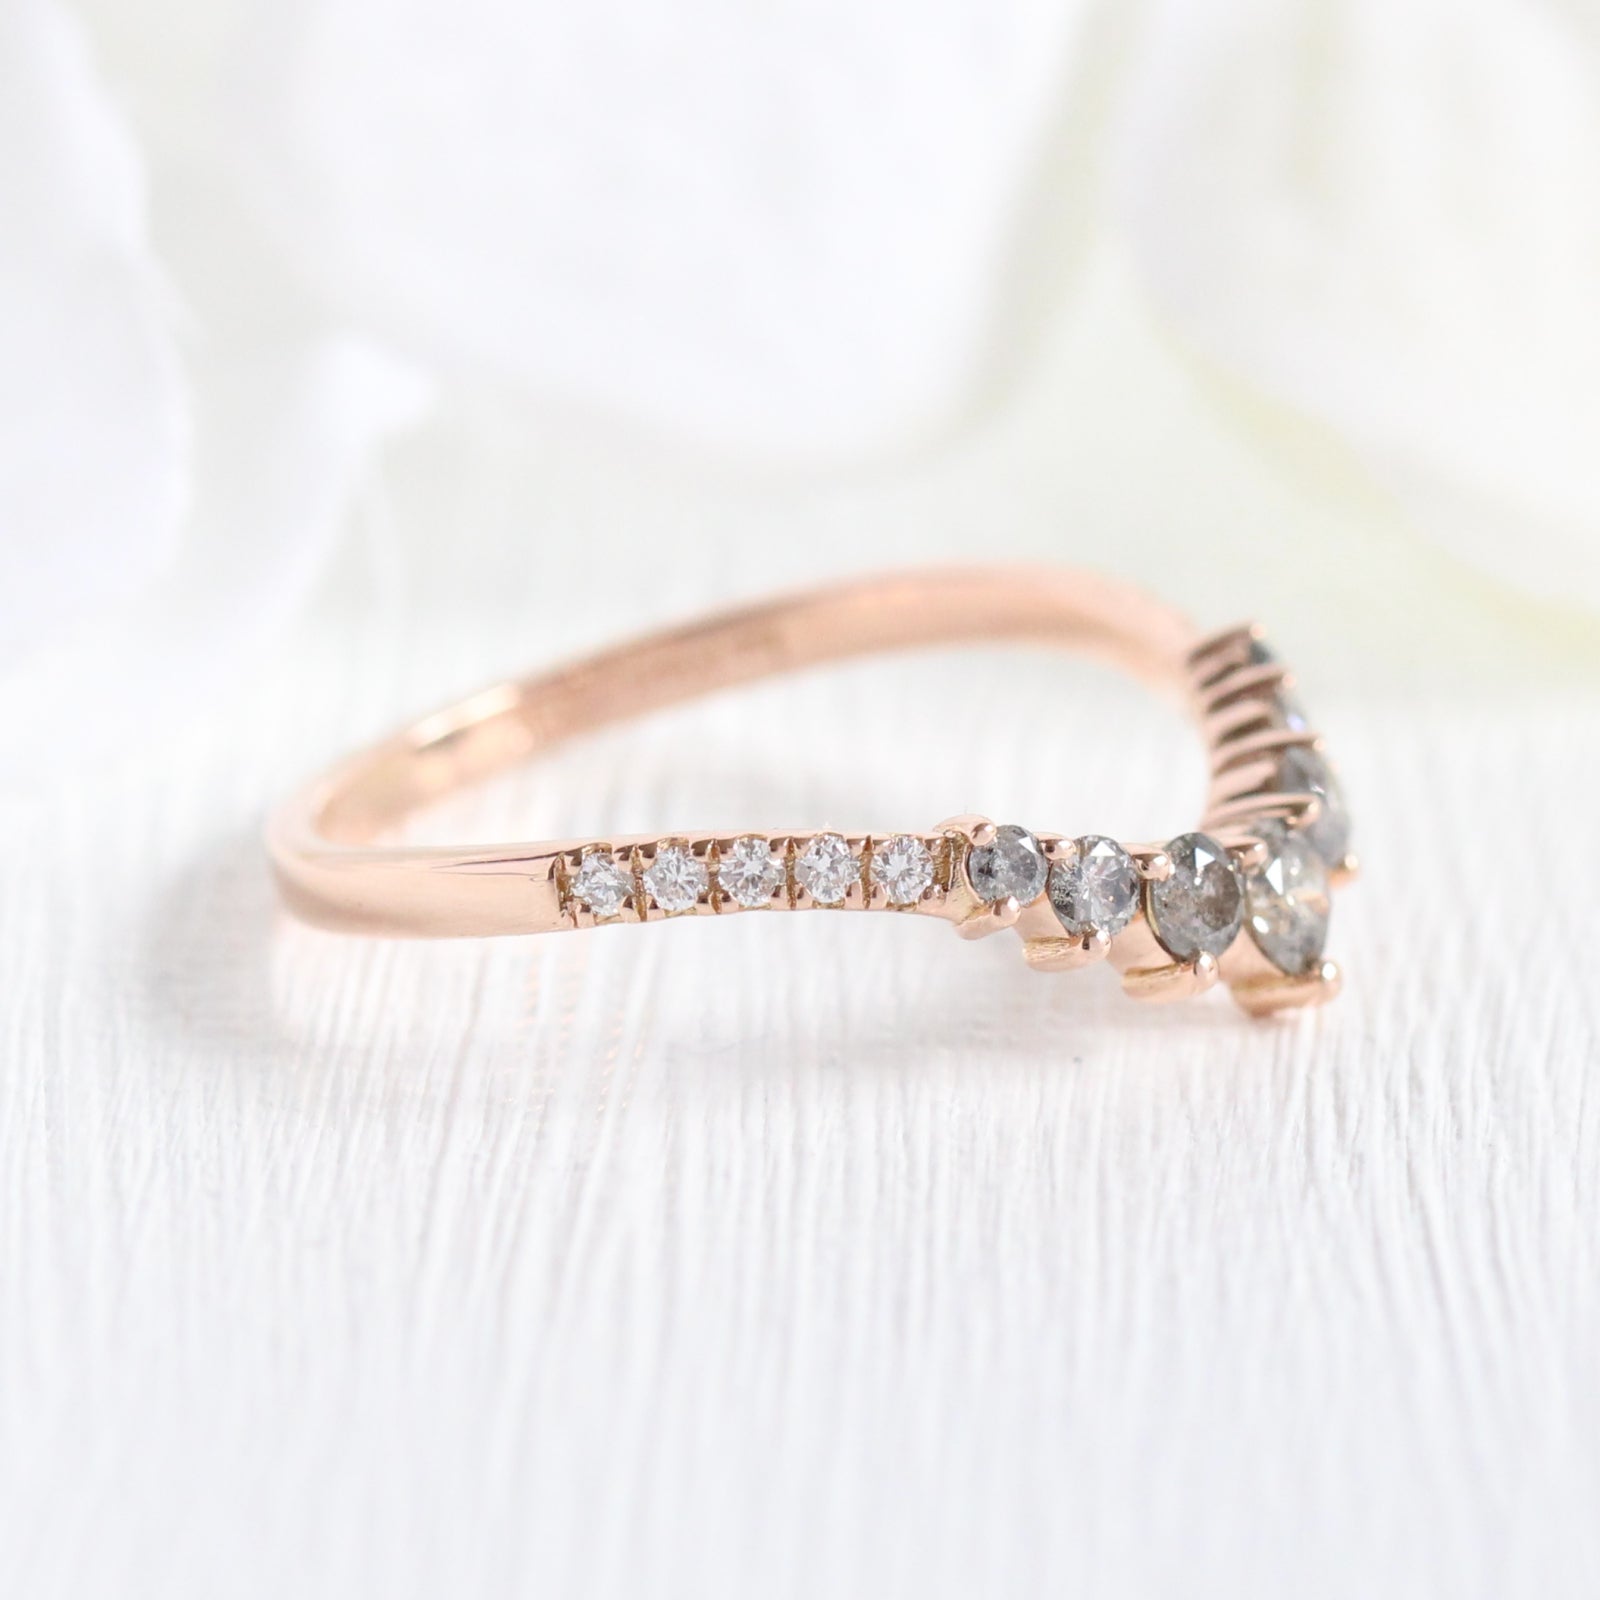 Salt and Pepper Diamond Wedding Ring in 14k Rose Gold Curved Pave Band, Size 5.5